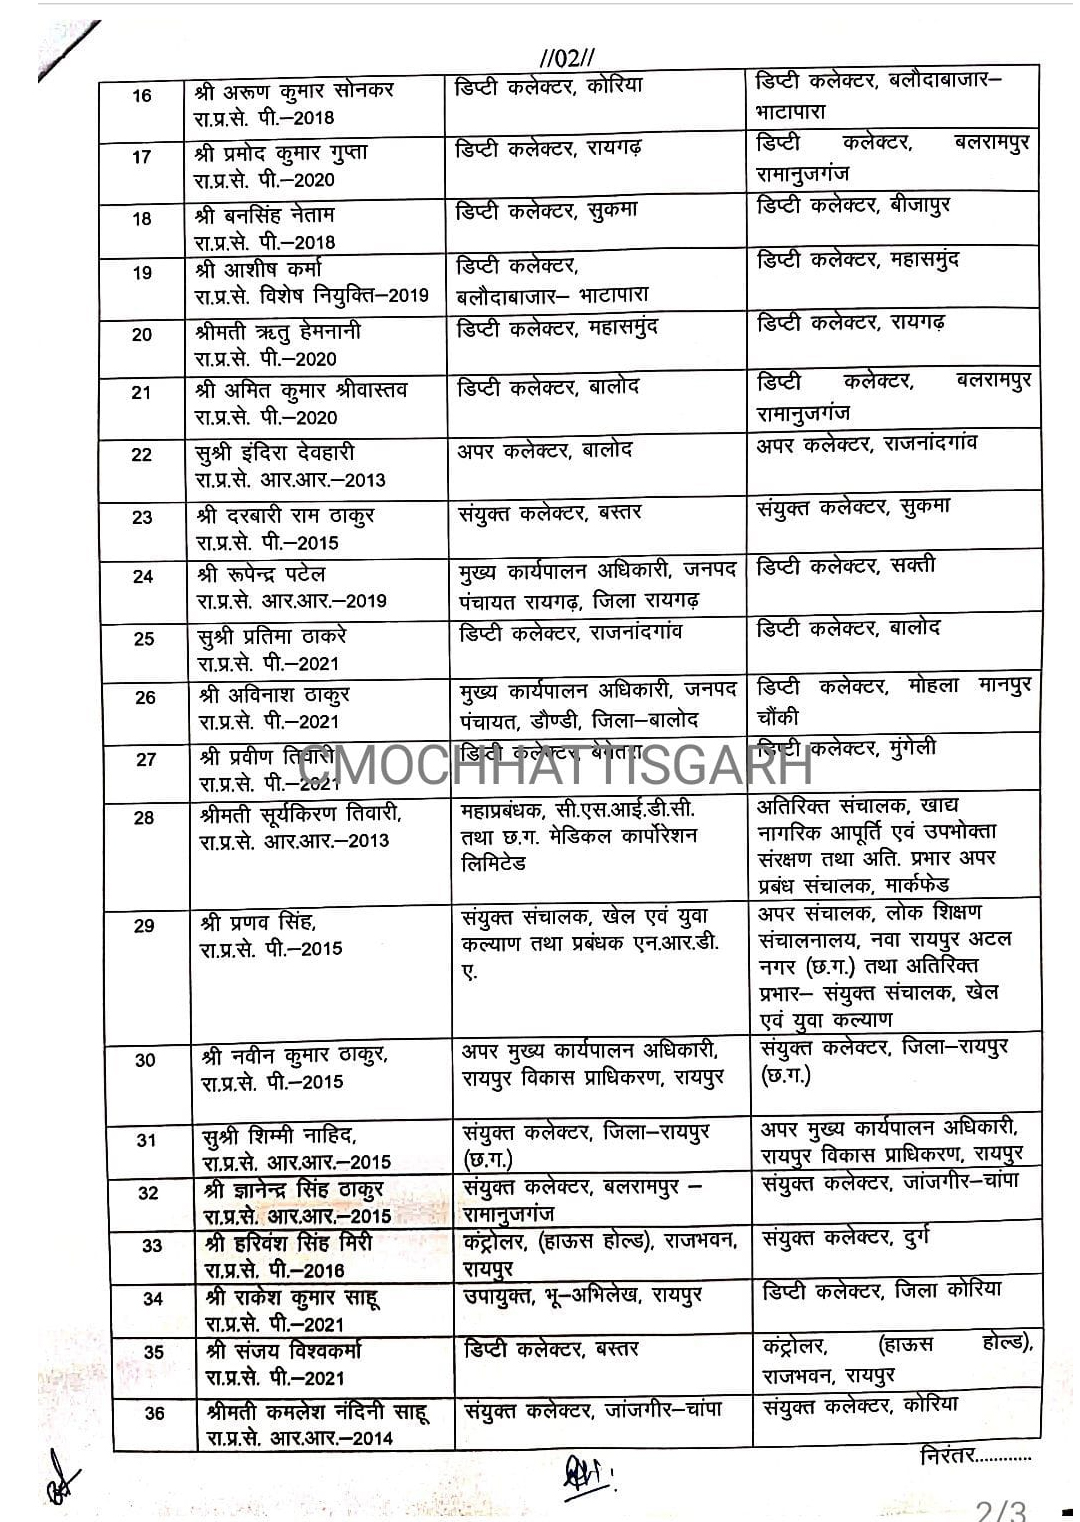 Breaking News, Government of Chhattisgarh, big reshuffle, charge changed of 39 administrative officers, Khabargali